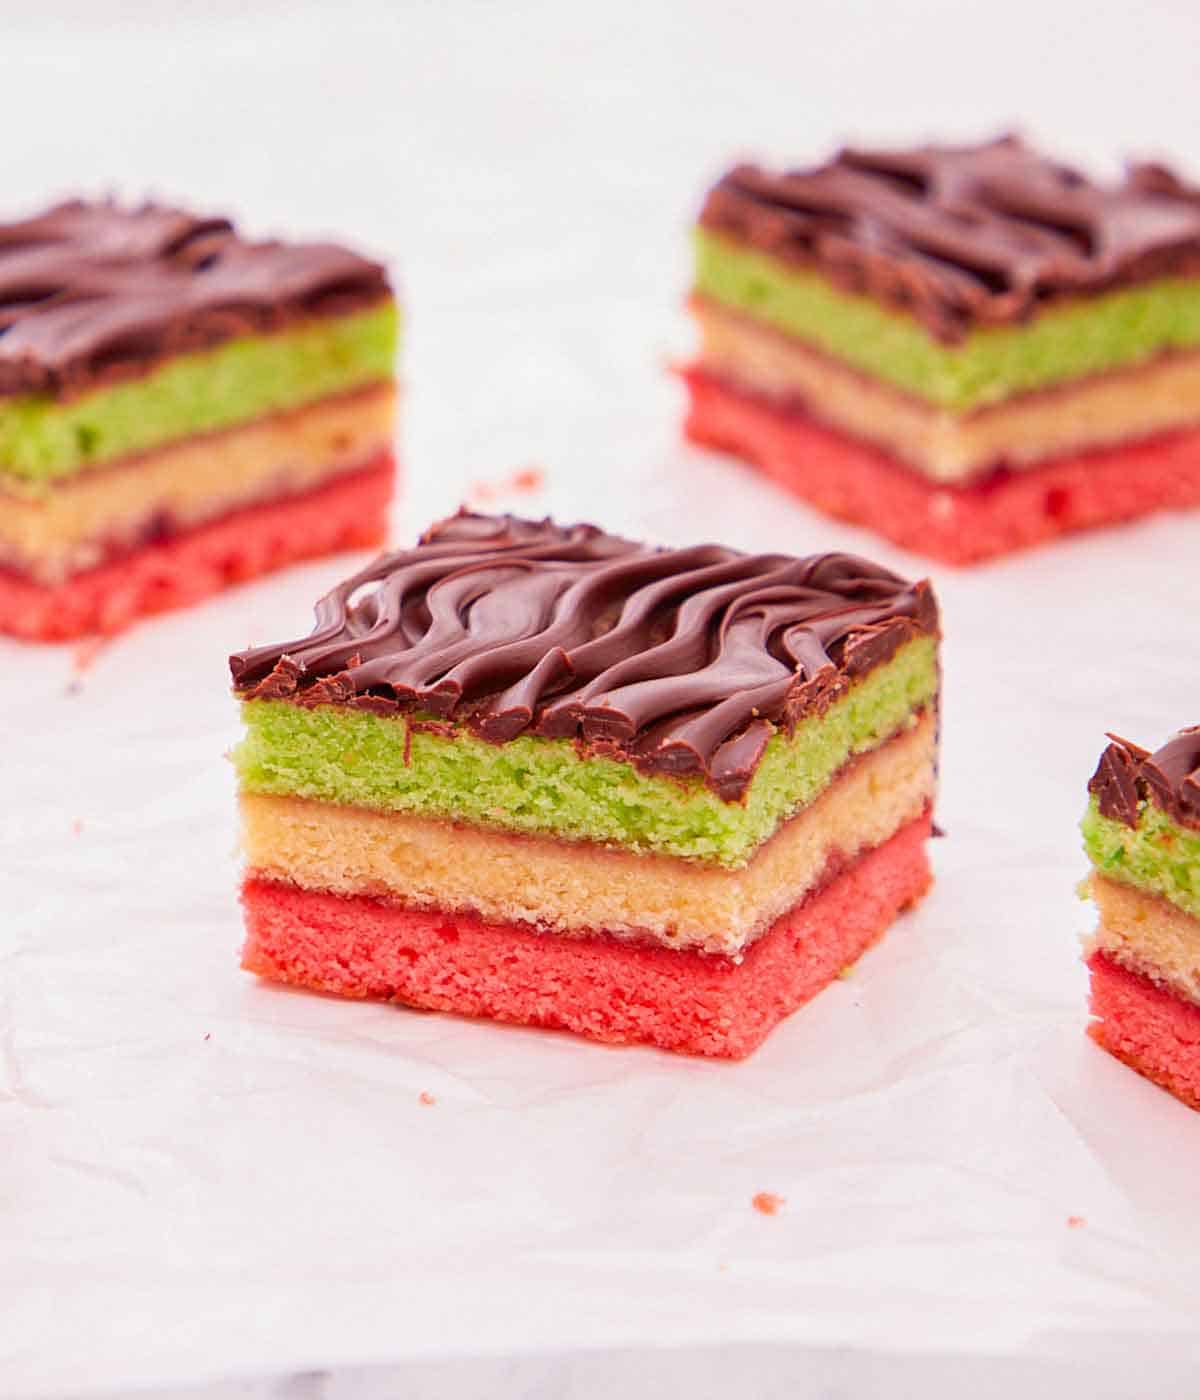 A couple of rainbow cookies with one in focus and in the middle, showing the colorful layers.